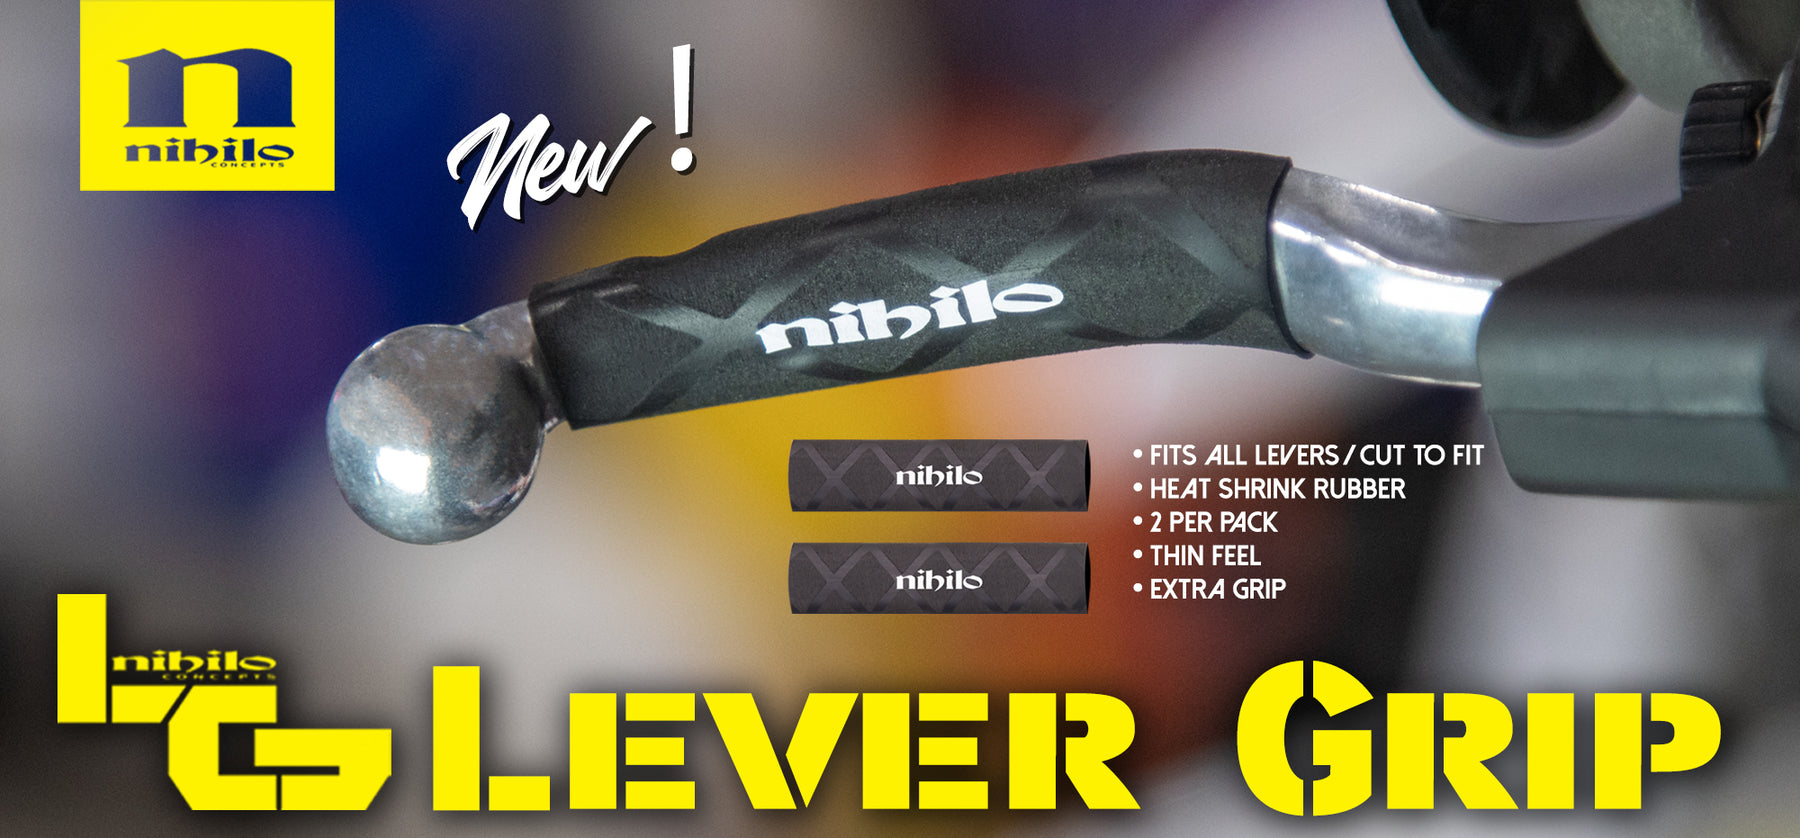 All New Lever Grip